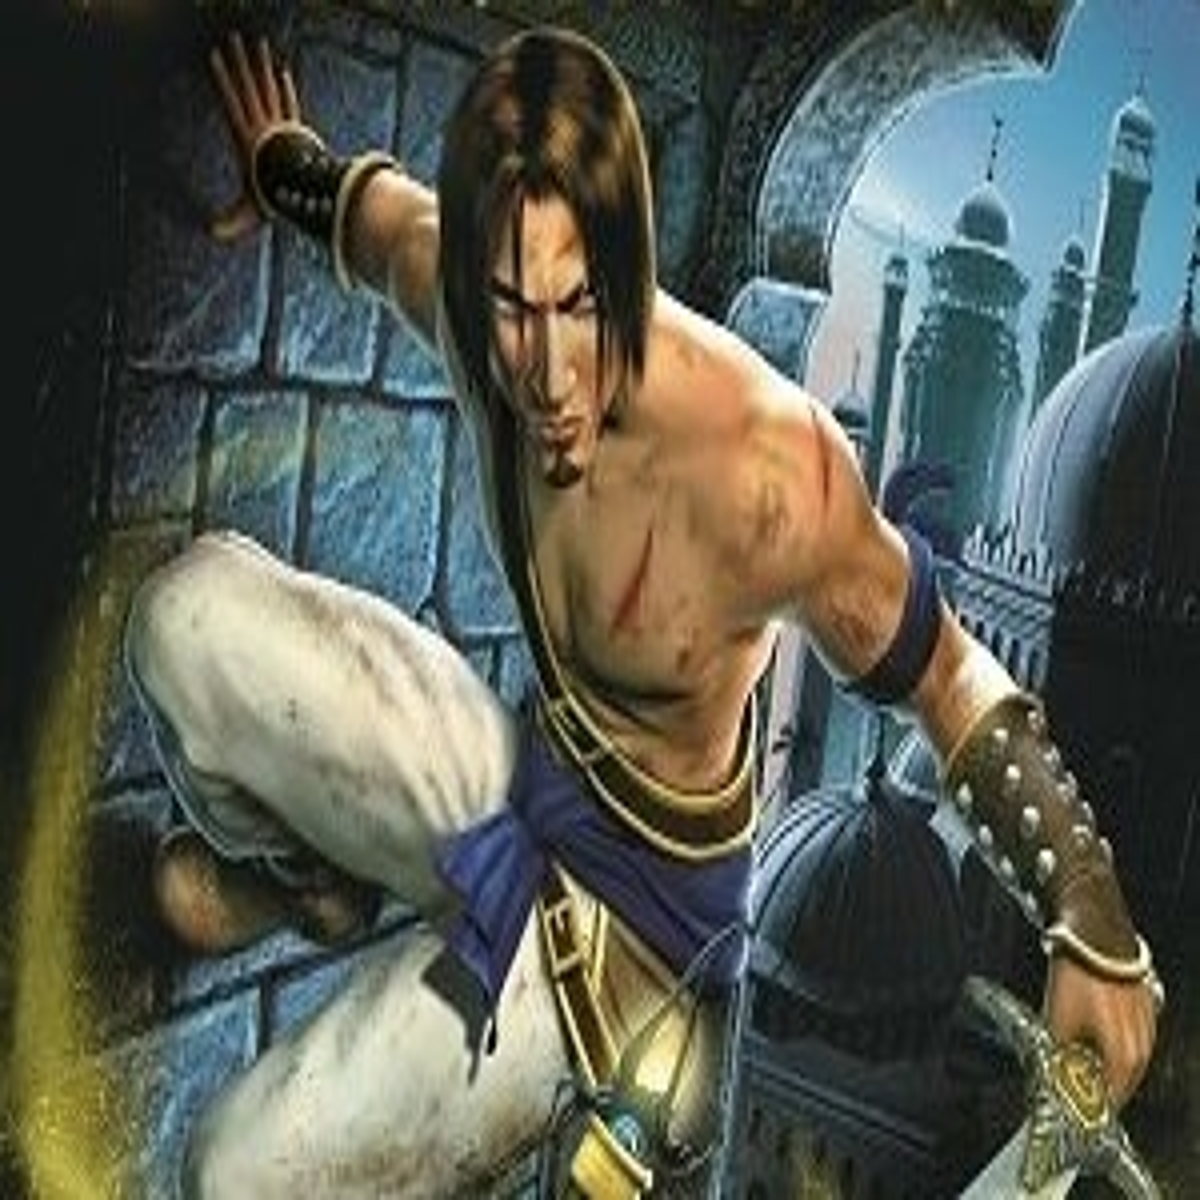 Get your free Prince of Persia game - CNET